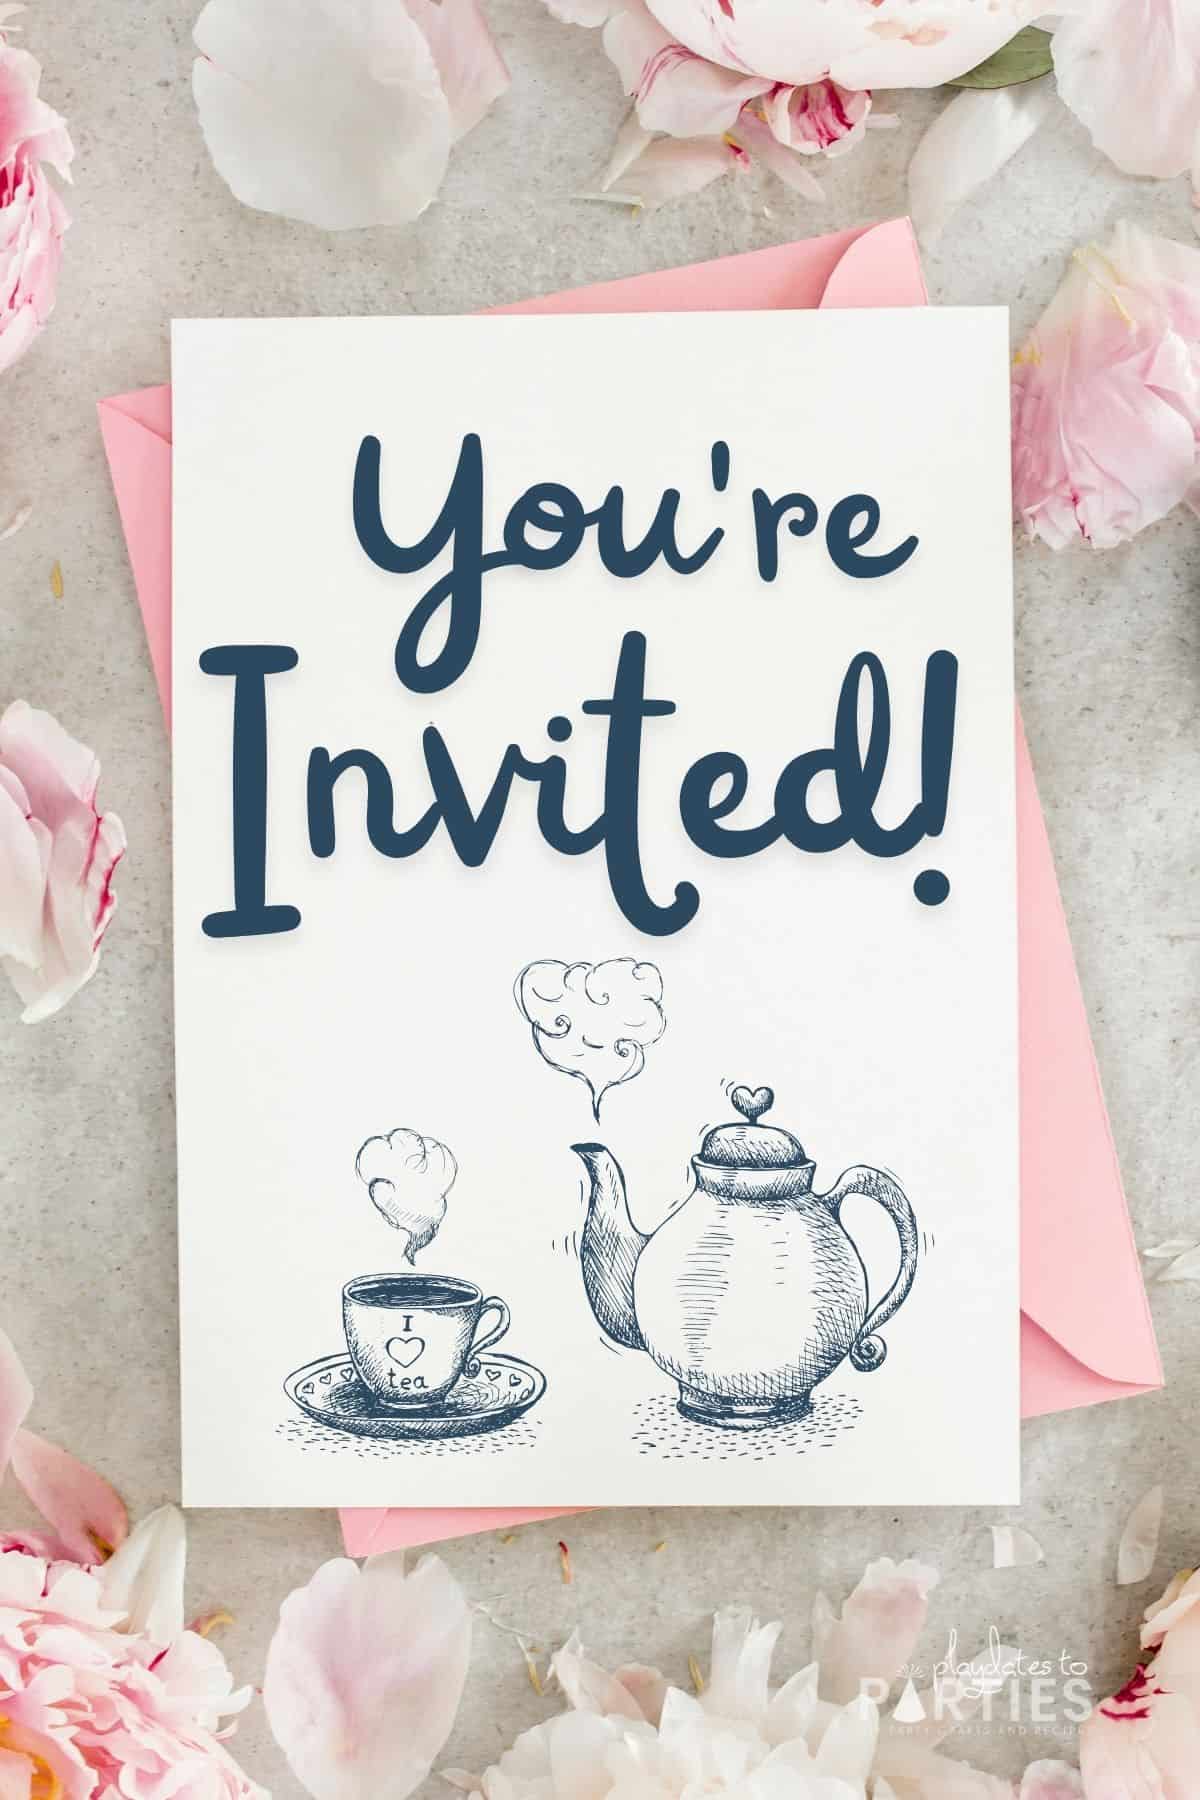 A tea party invitation with a tea pot surrounded by pink flowers on a gray surface.